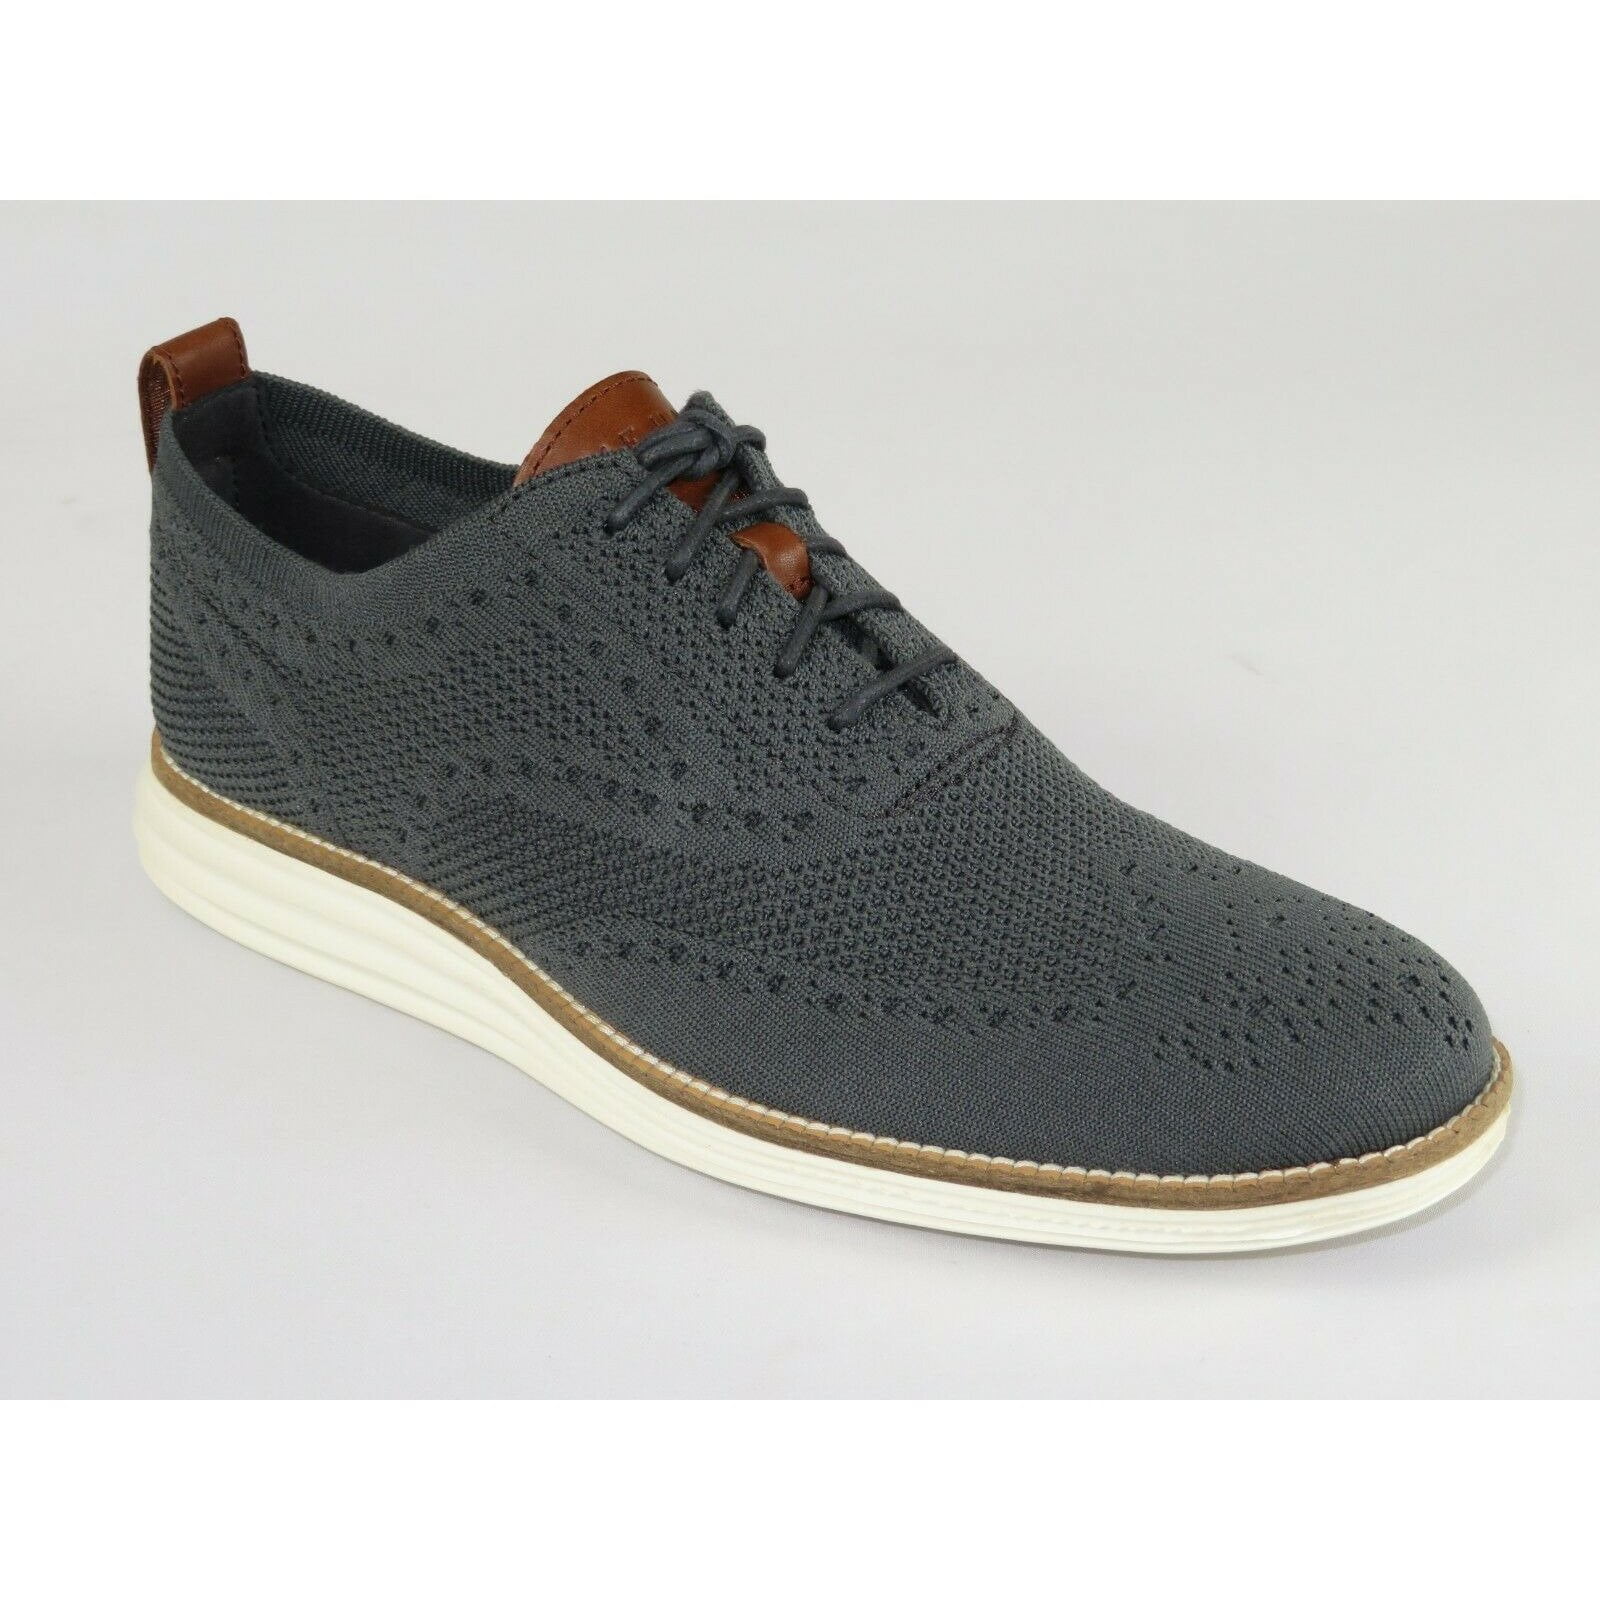 Cole Haan - Mens COLE HAAN RIGINALGRAND Comfort Shoes lace up Cloth